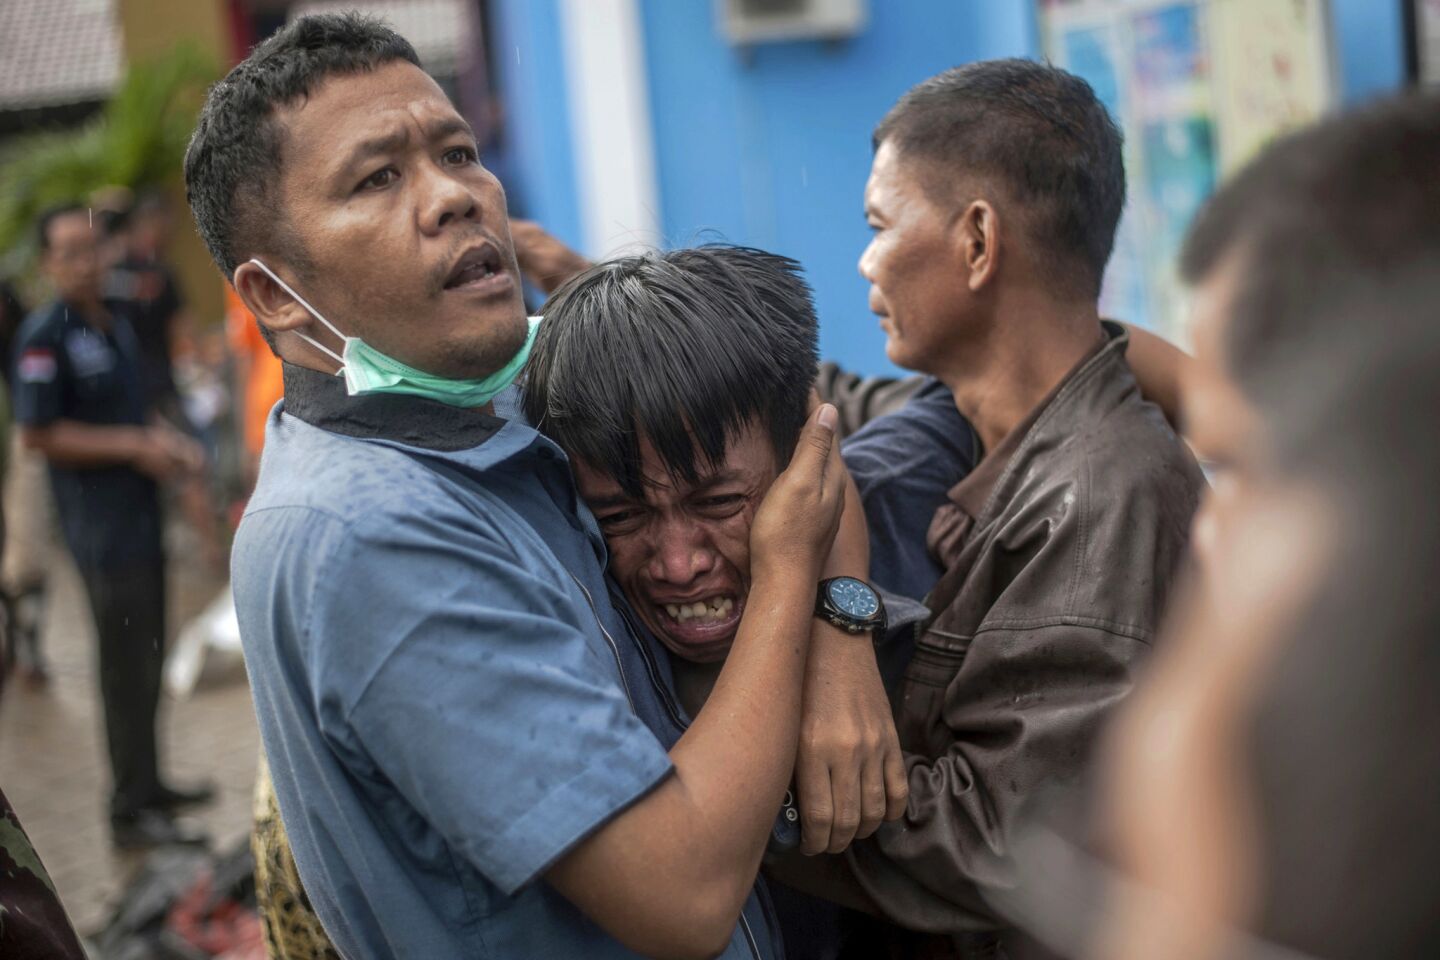 Death toll continues to rise following tsunami in Indonesia